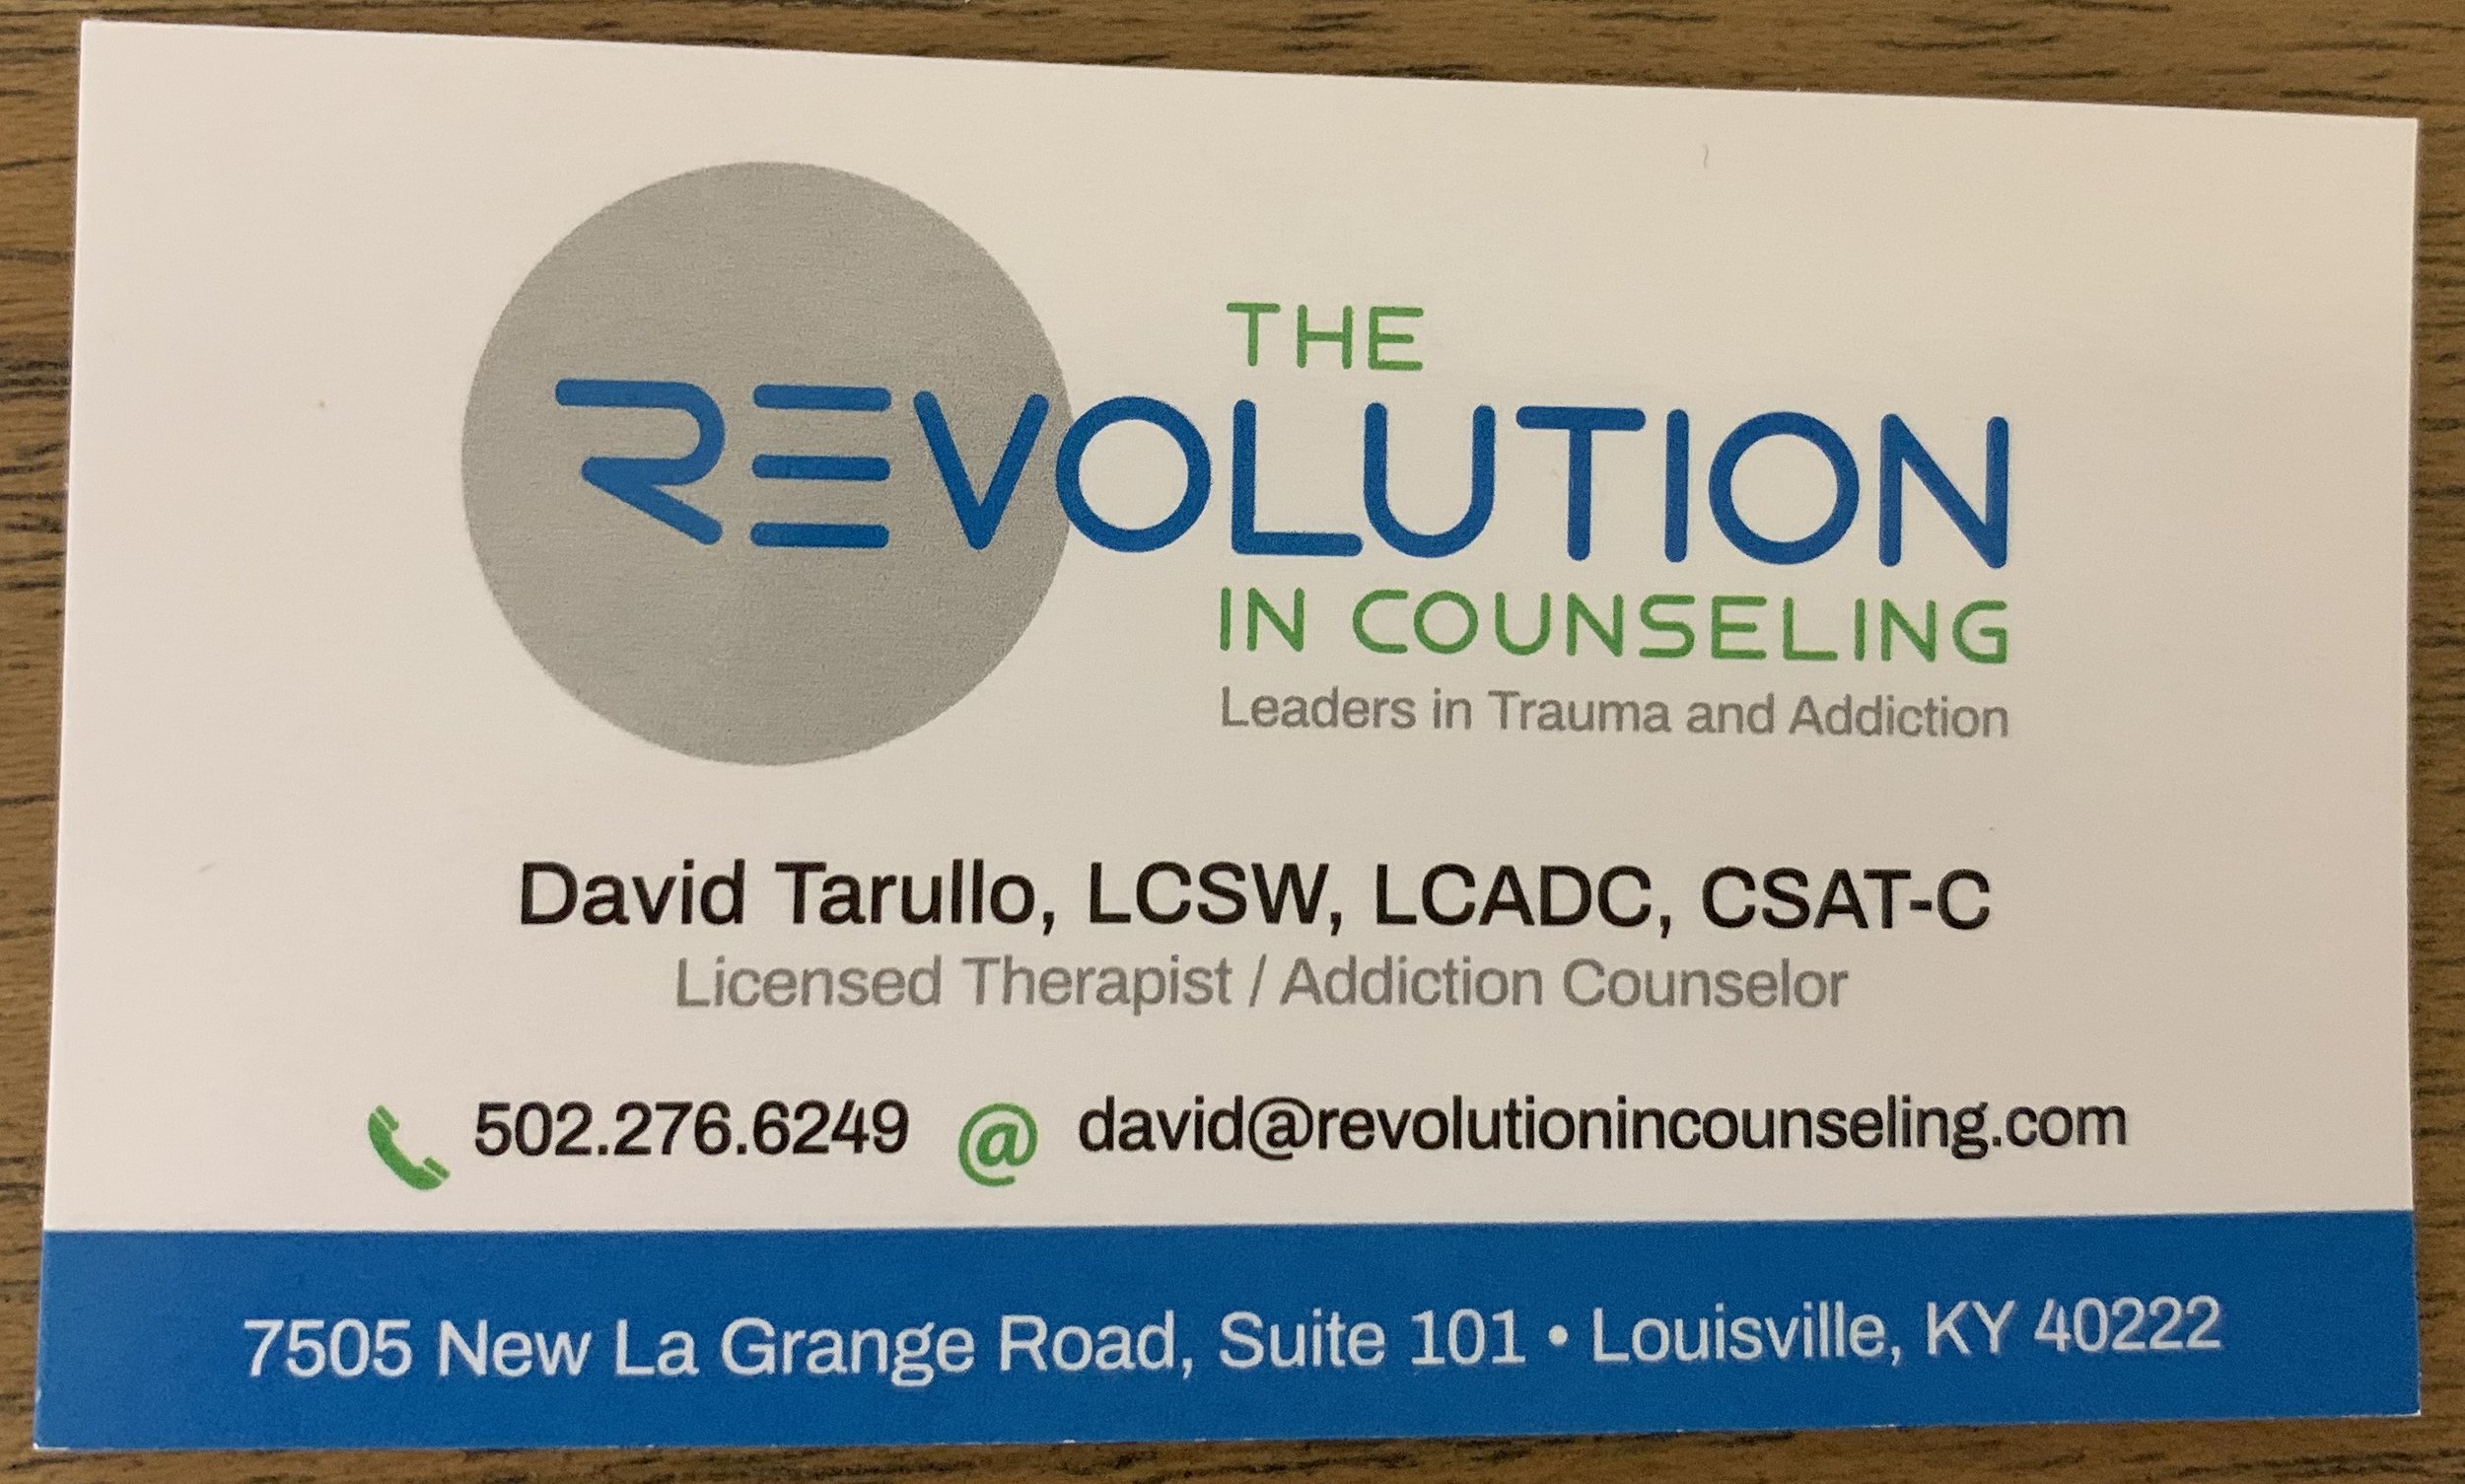 The Revolution in Counseling, Leaders in Trauma and Addiction Counseling